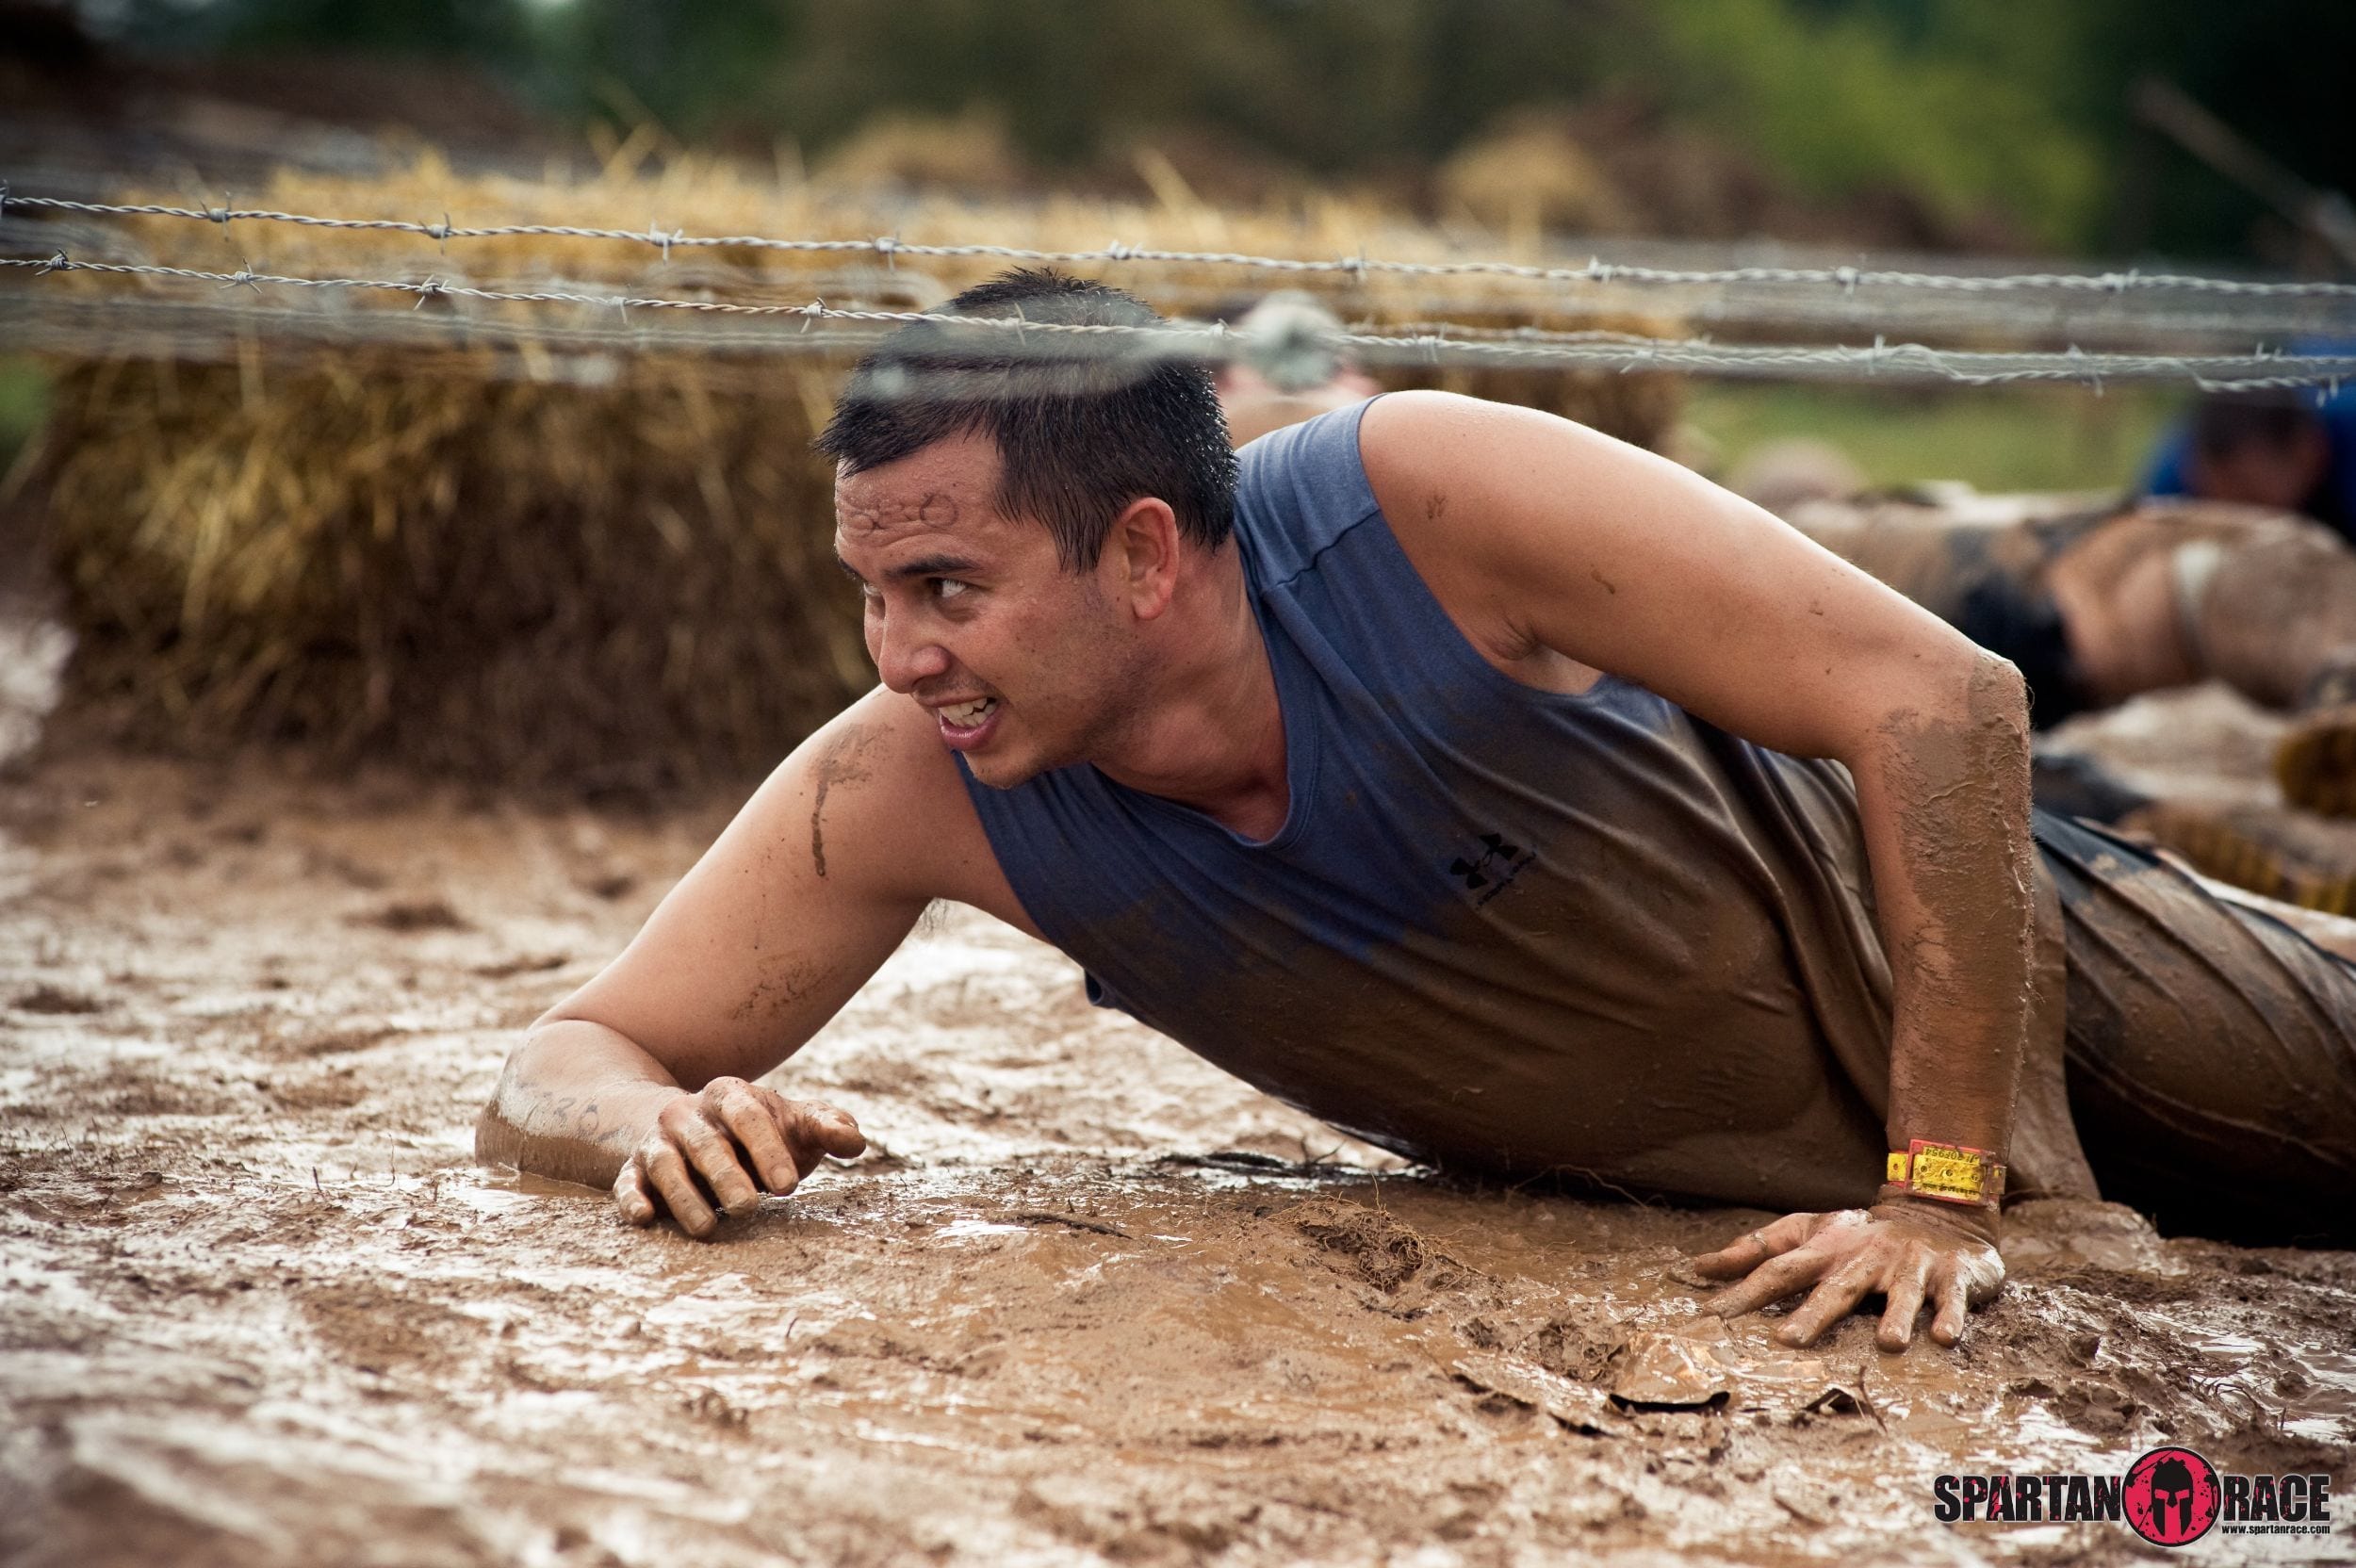 10 Lessons Learned From Running The Super Spartan Race